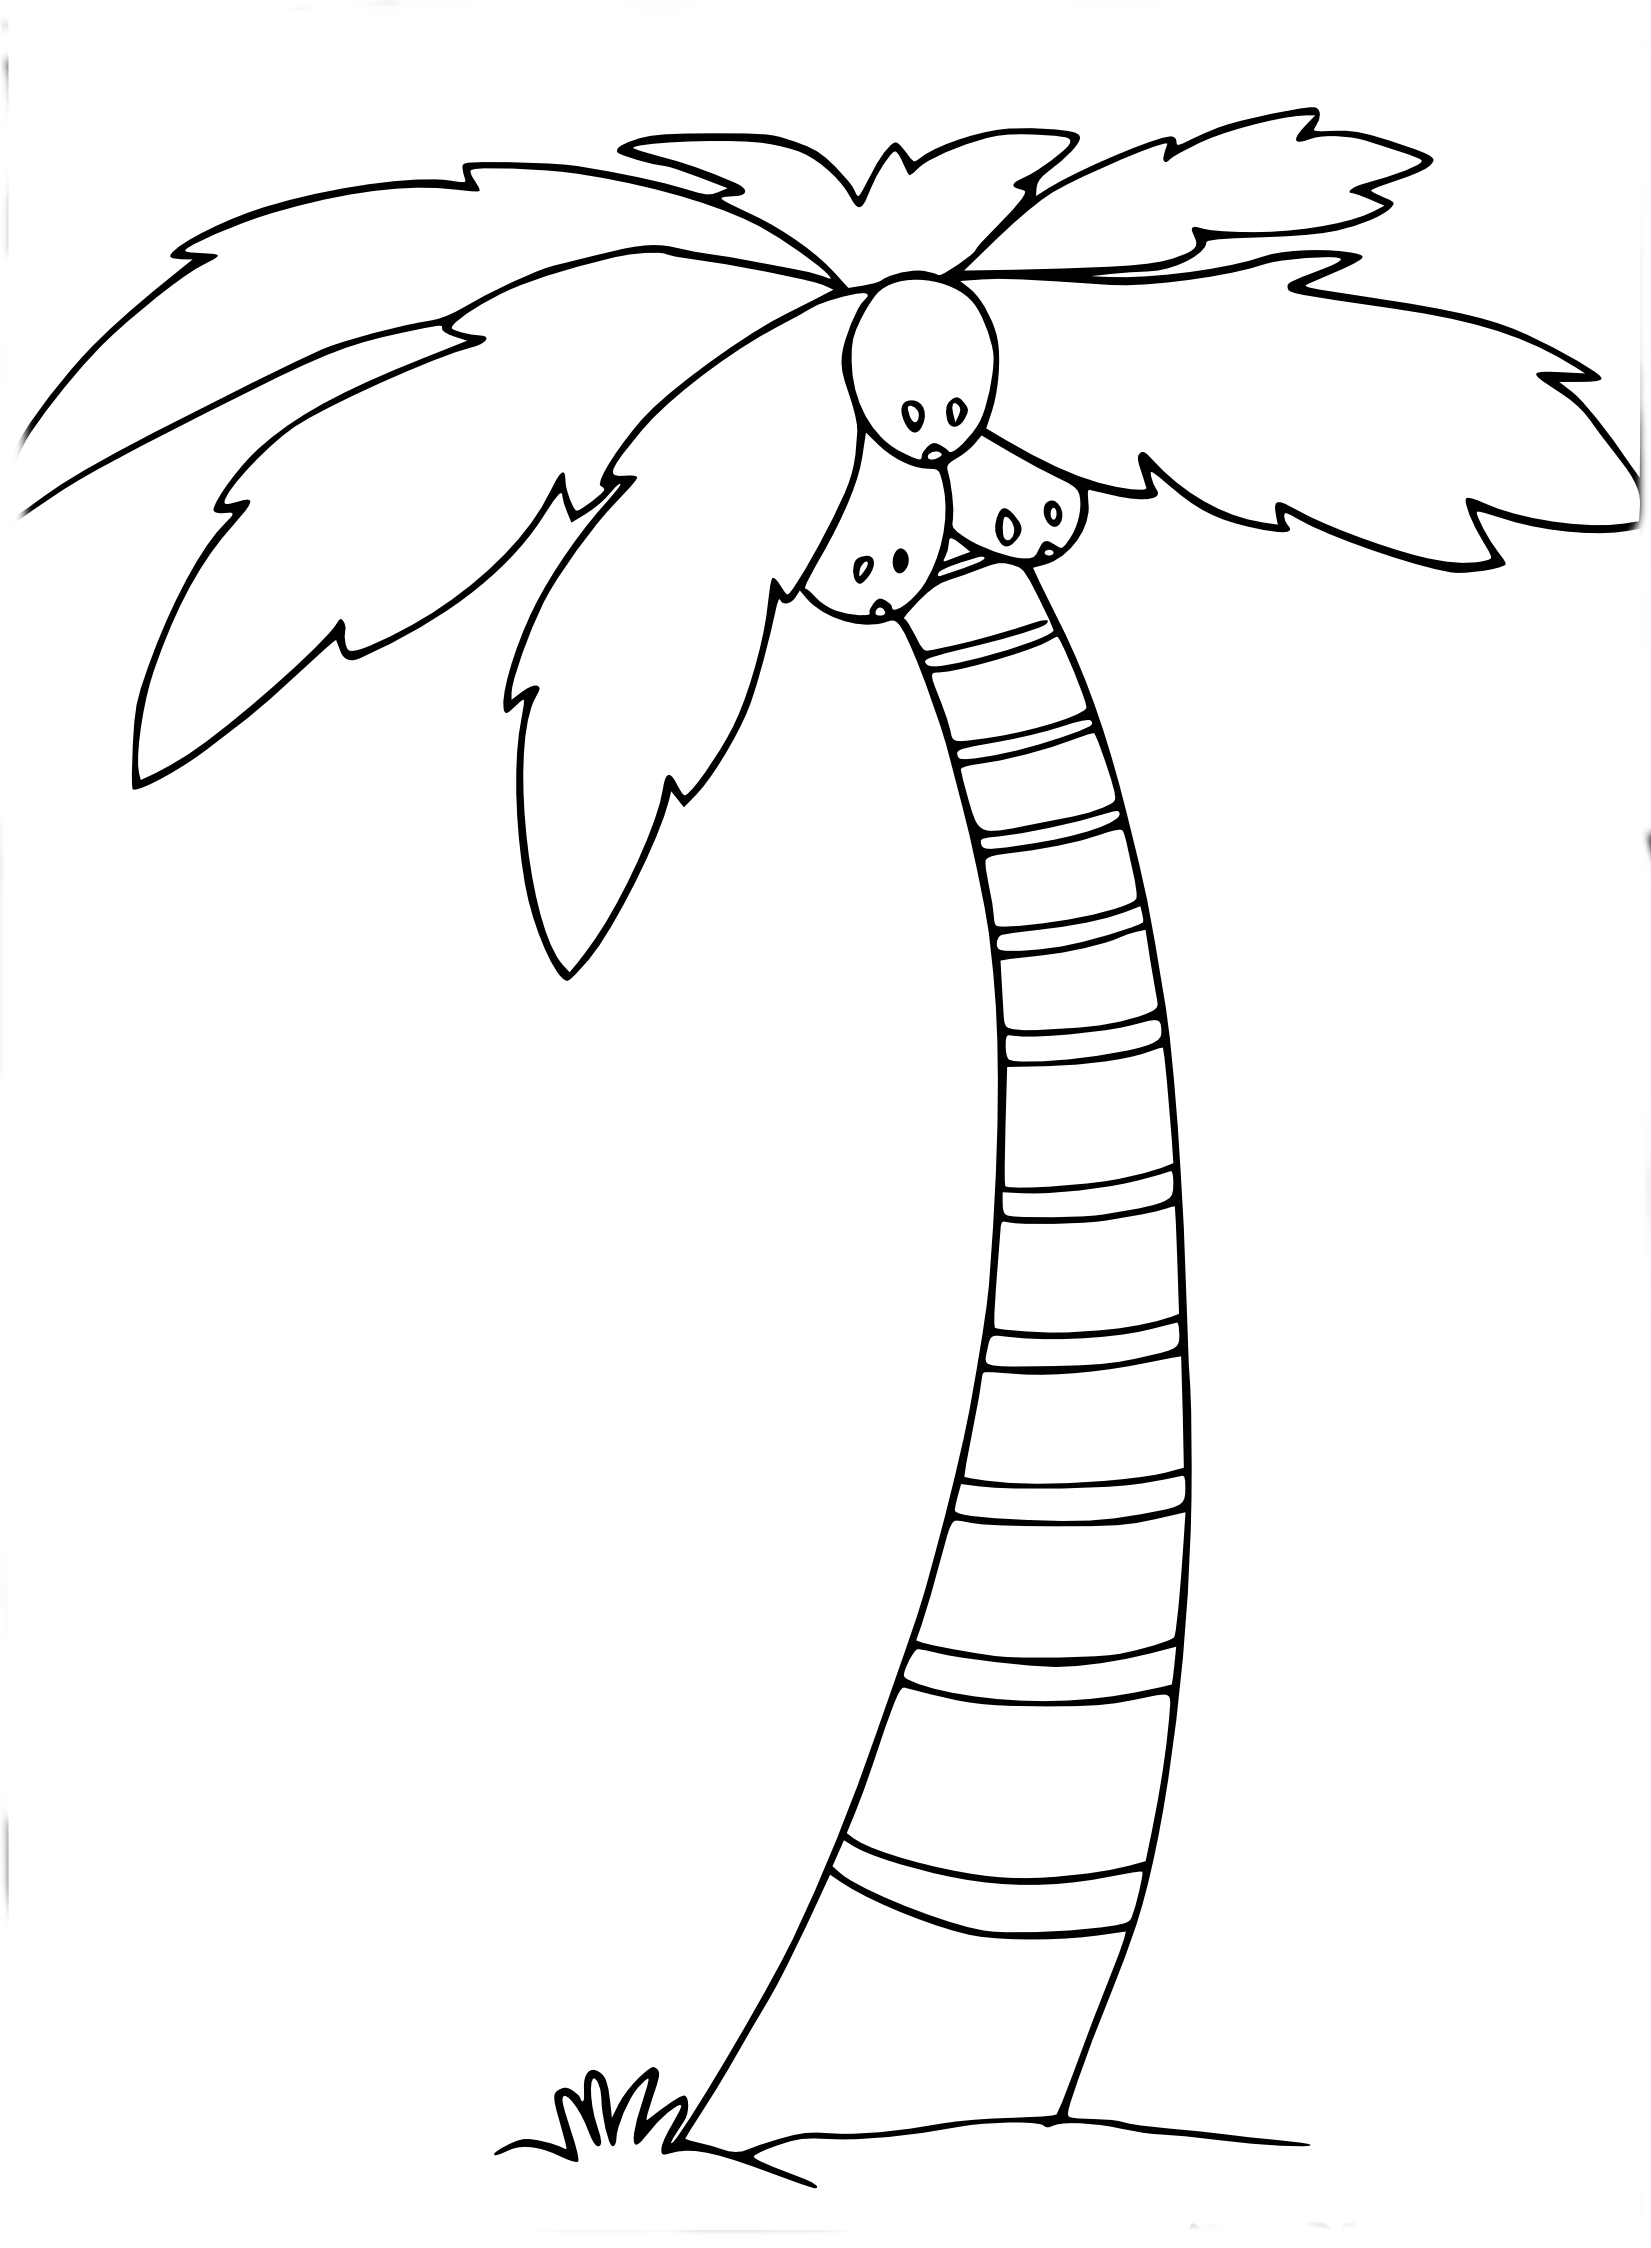 Jungle Tree coloring page